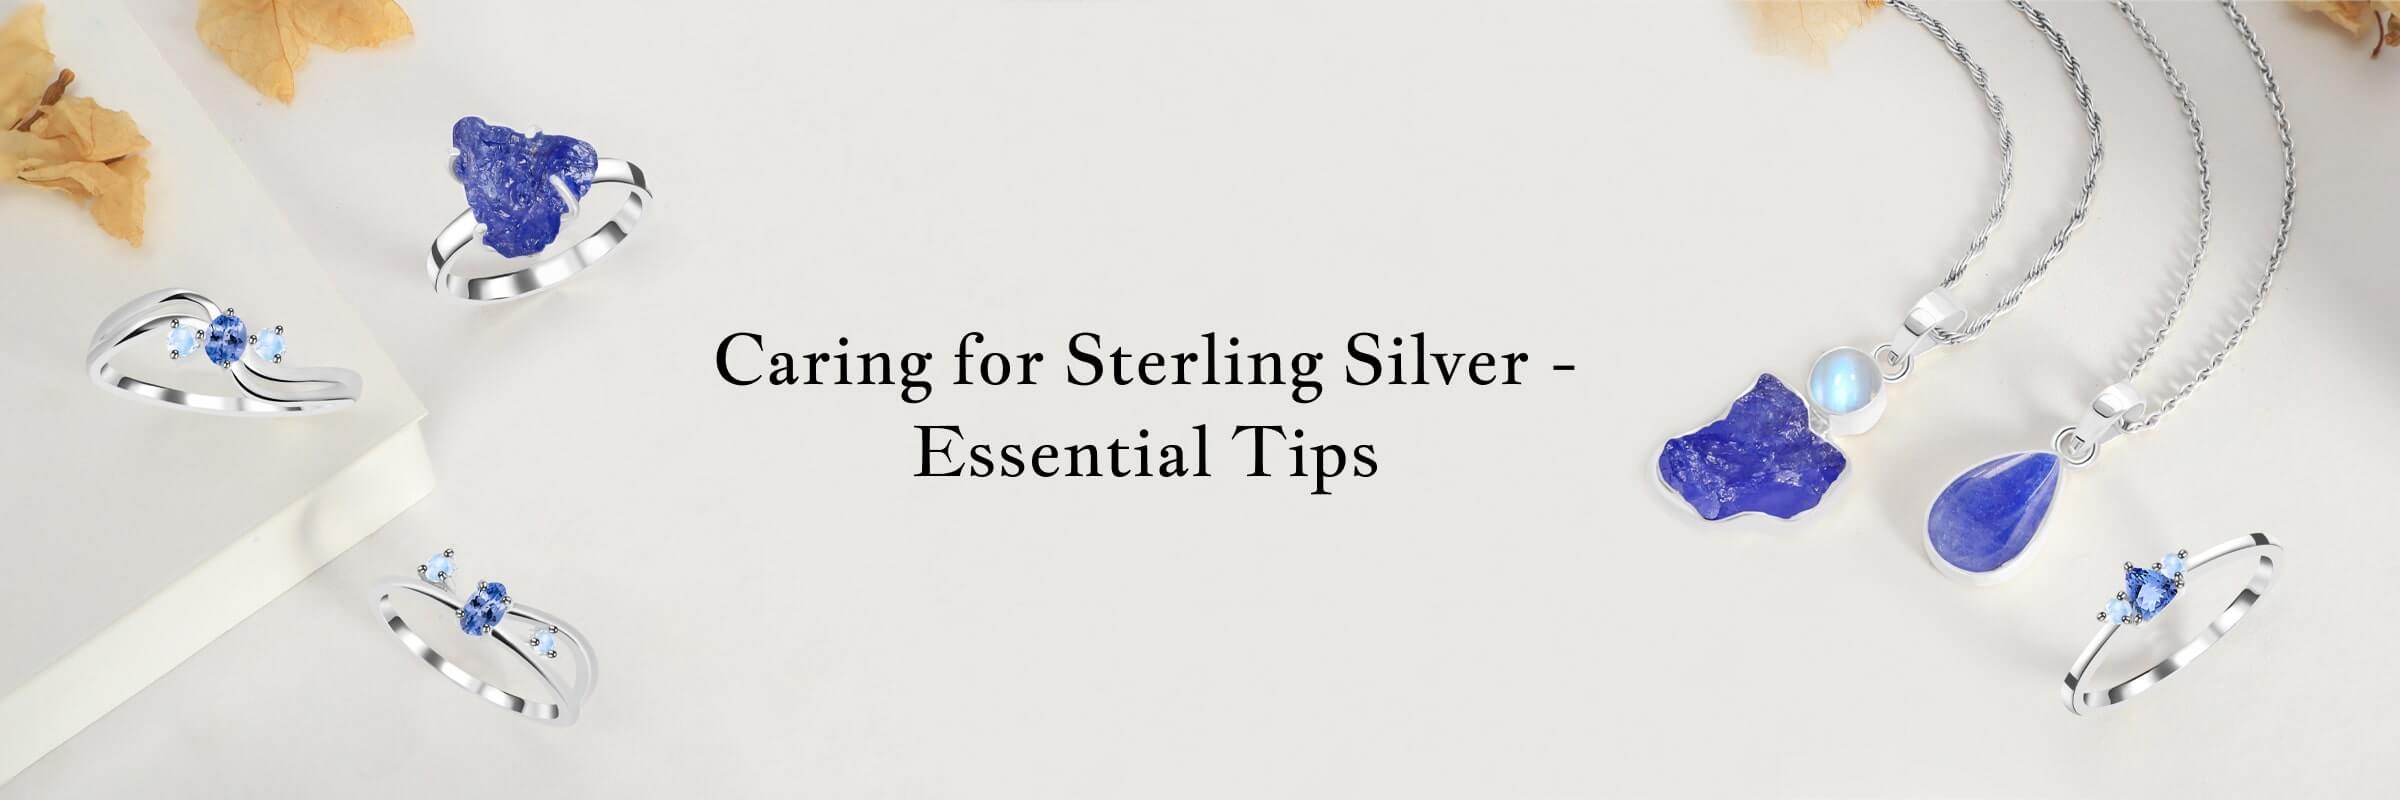 How to Care for Your Sterling Silver Jewelry